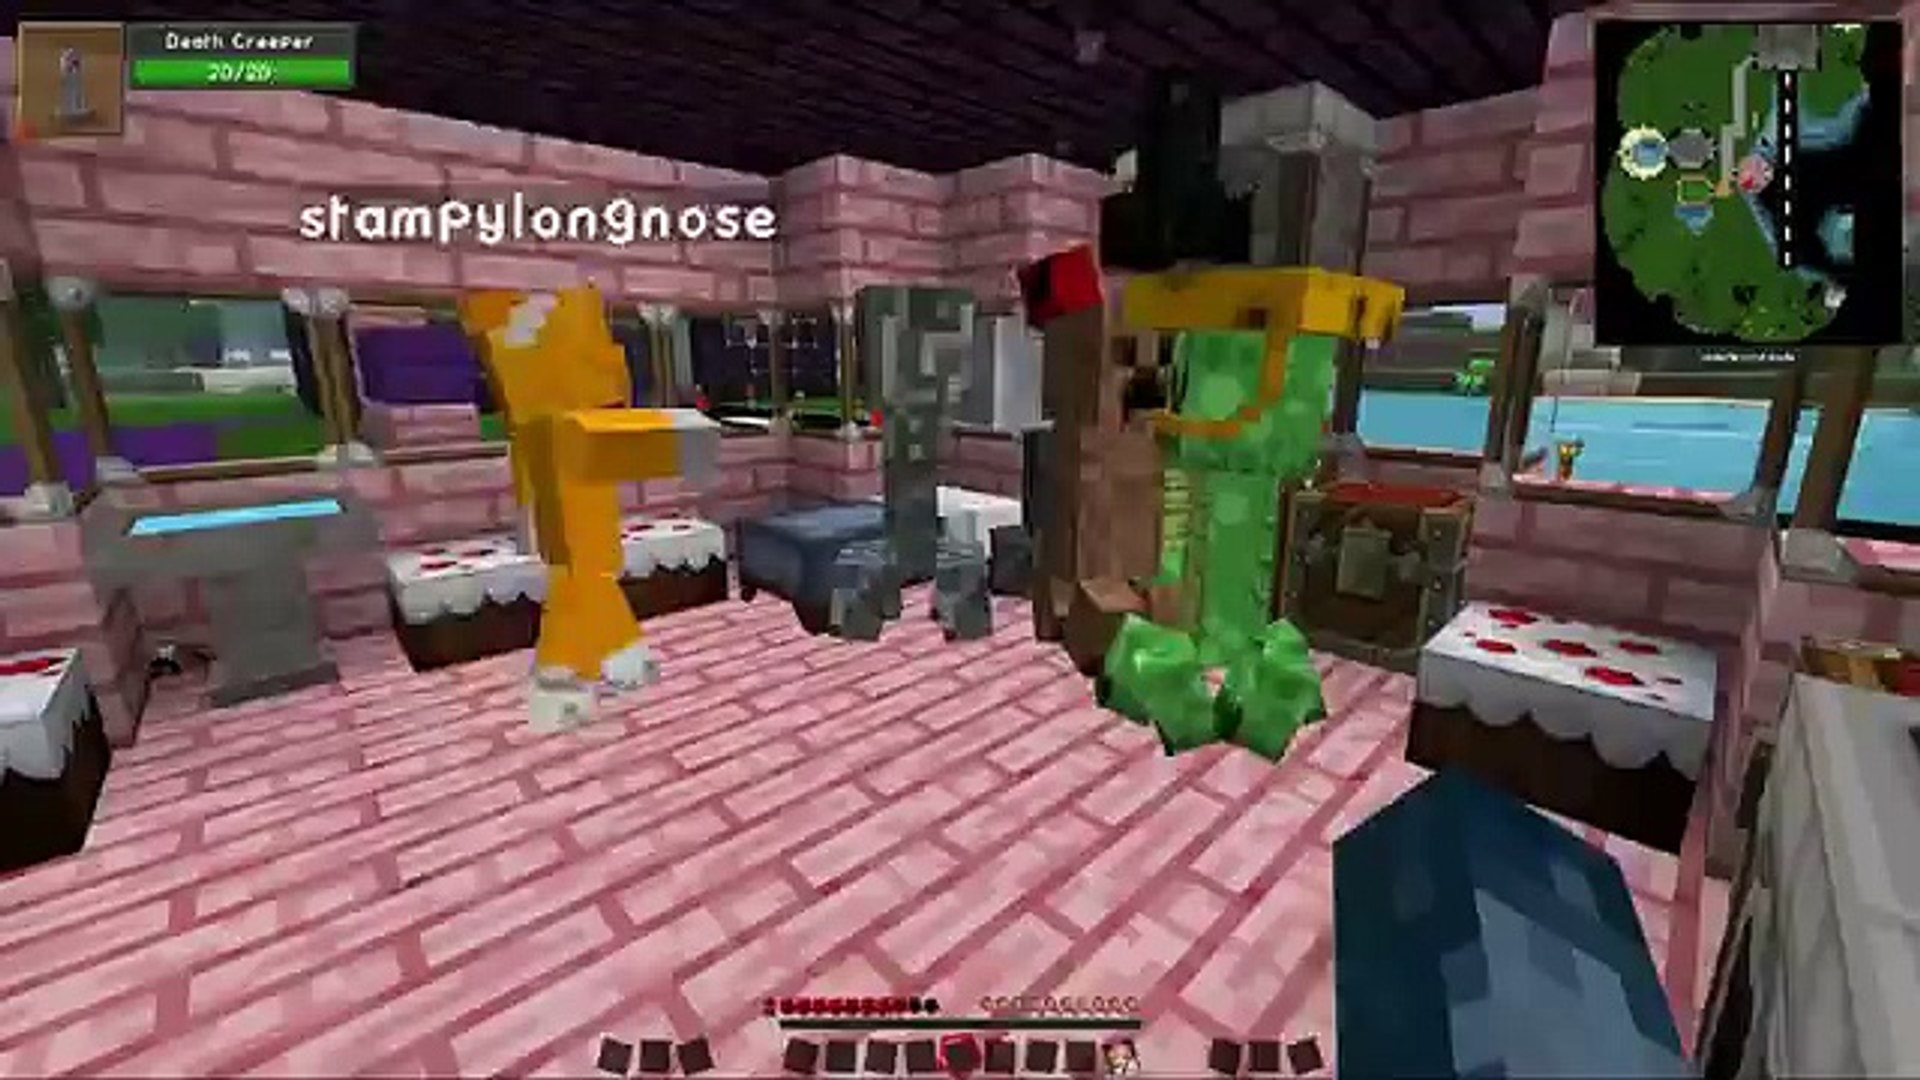 iballisticsquid hunger games with ash